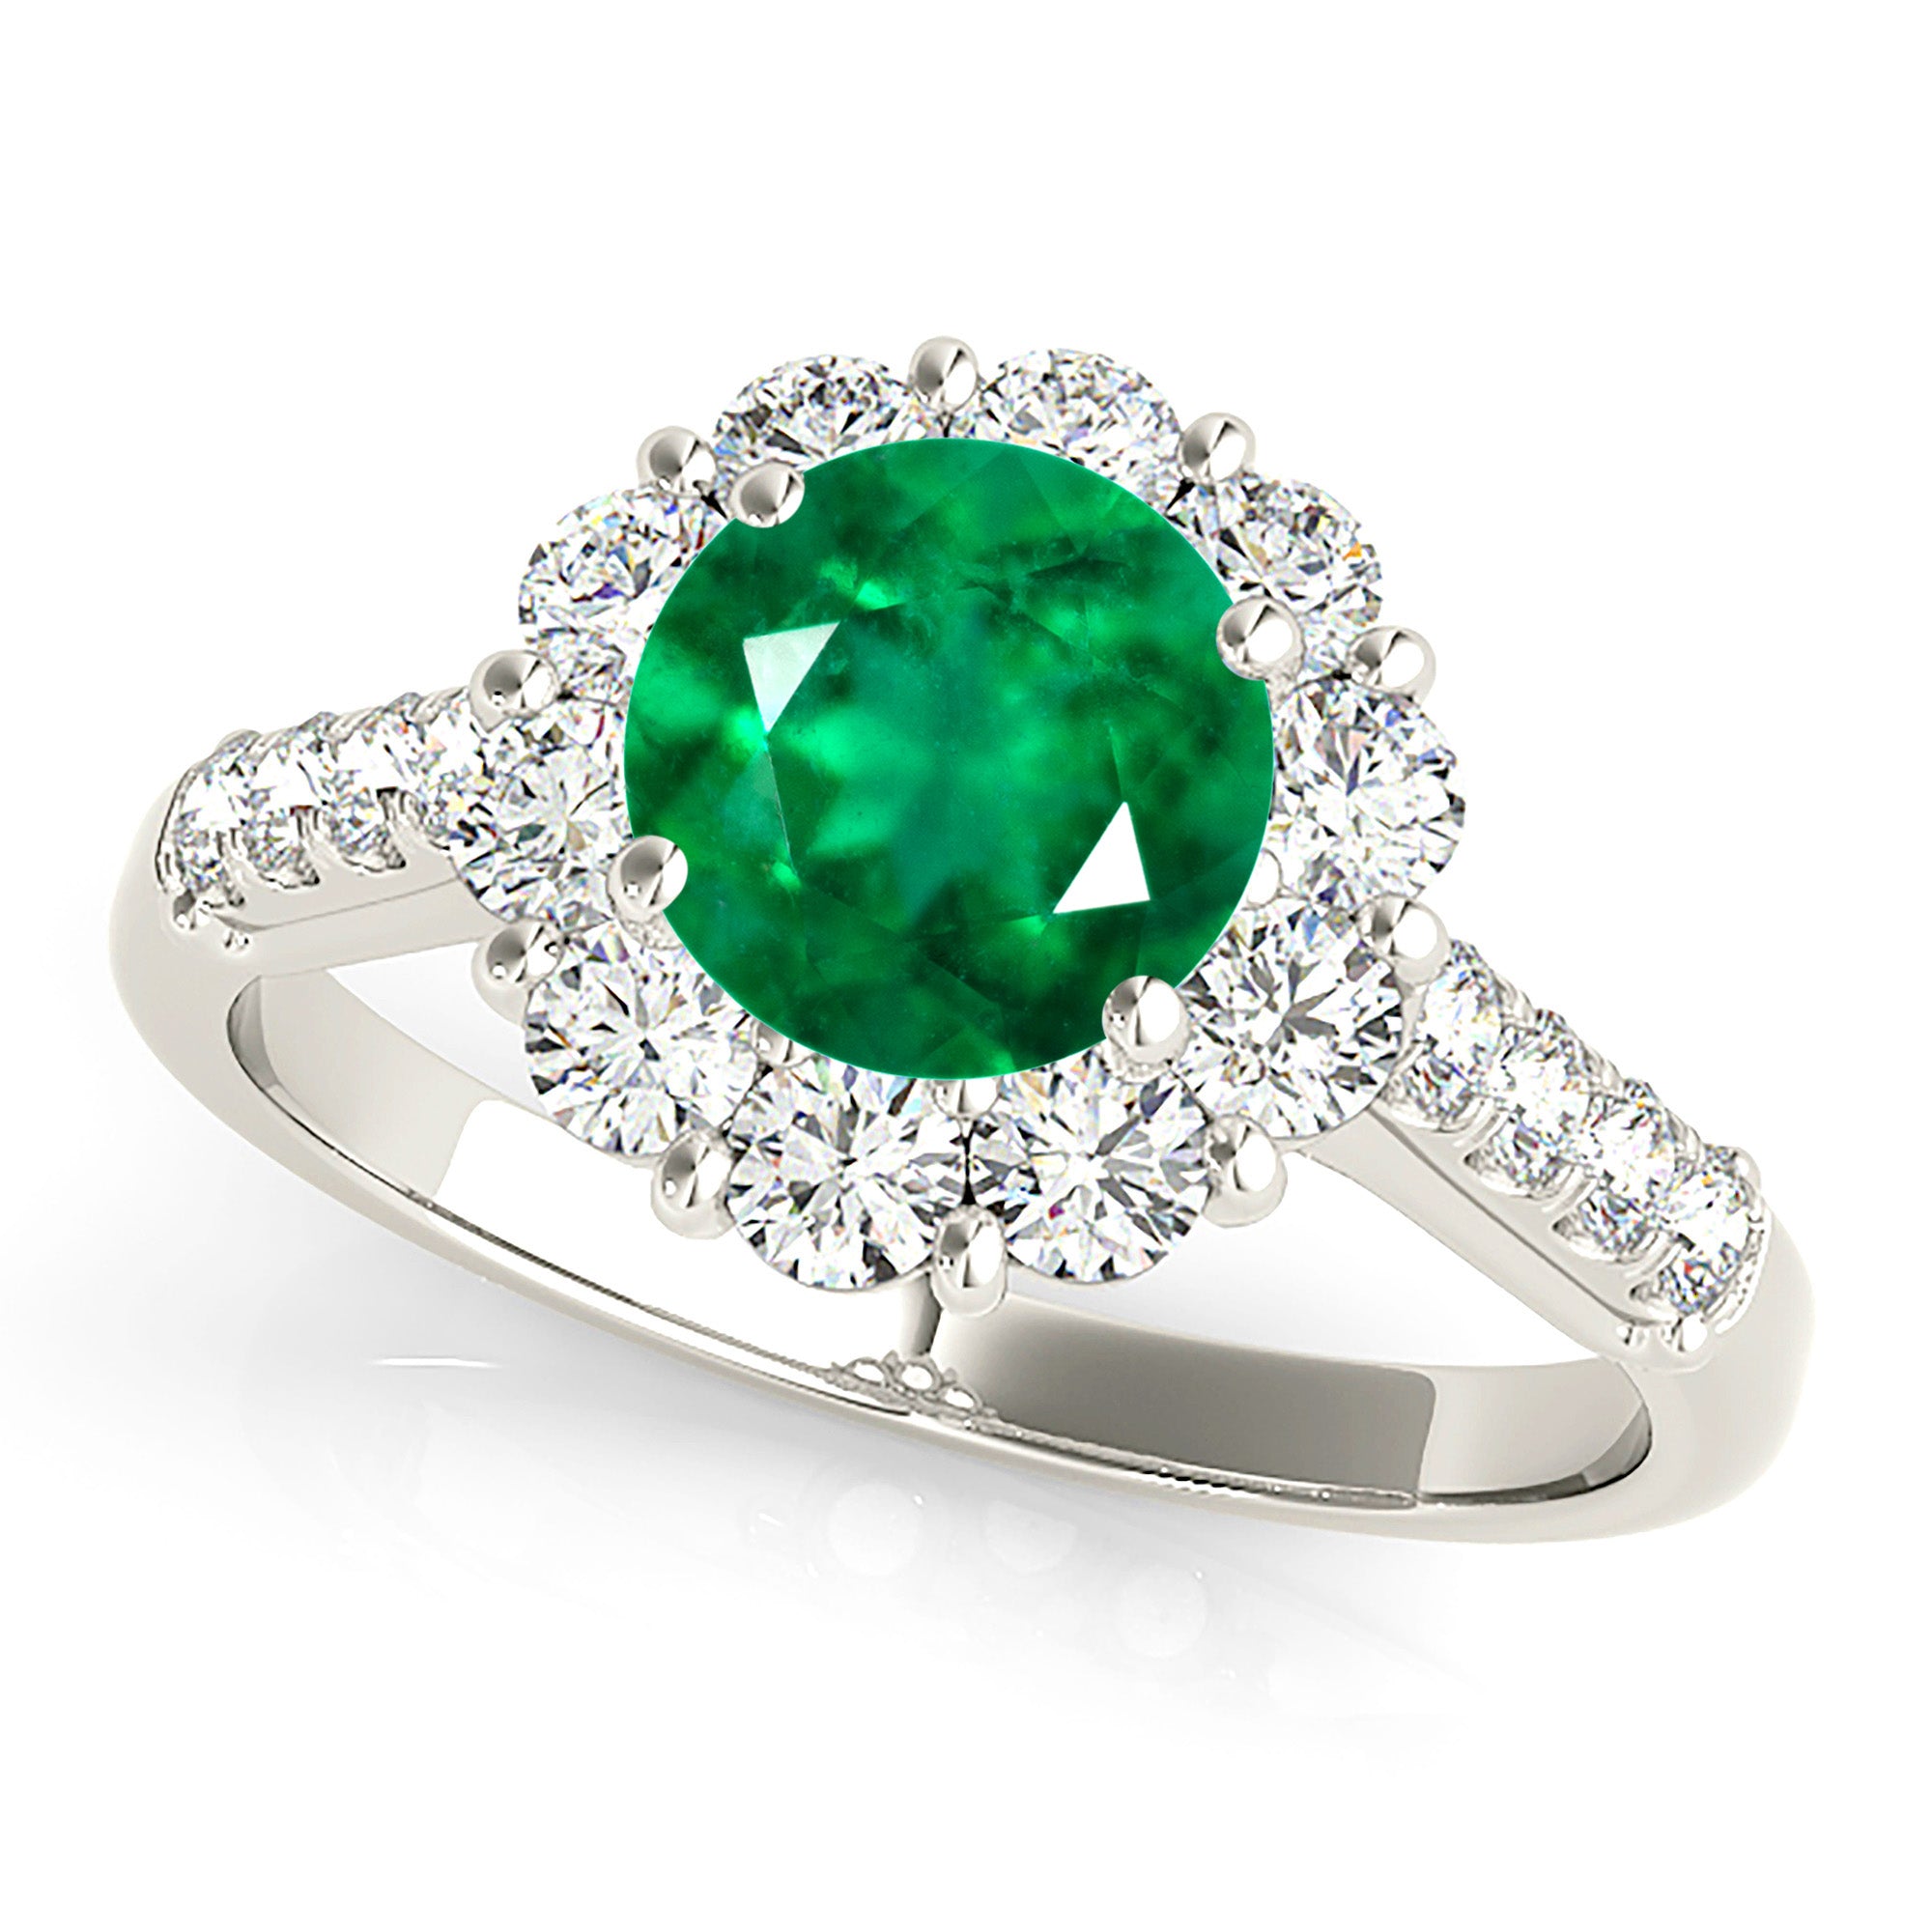 1.75 ct. Genuine Emerald Halo Ring With 1.00 ctw. Side Diamonds-in 14K/18K White, Yellow, Rose Gold and Platinum - Christmas Jewelry Gift -VIRABYANI